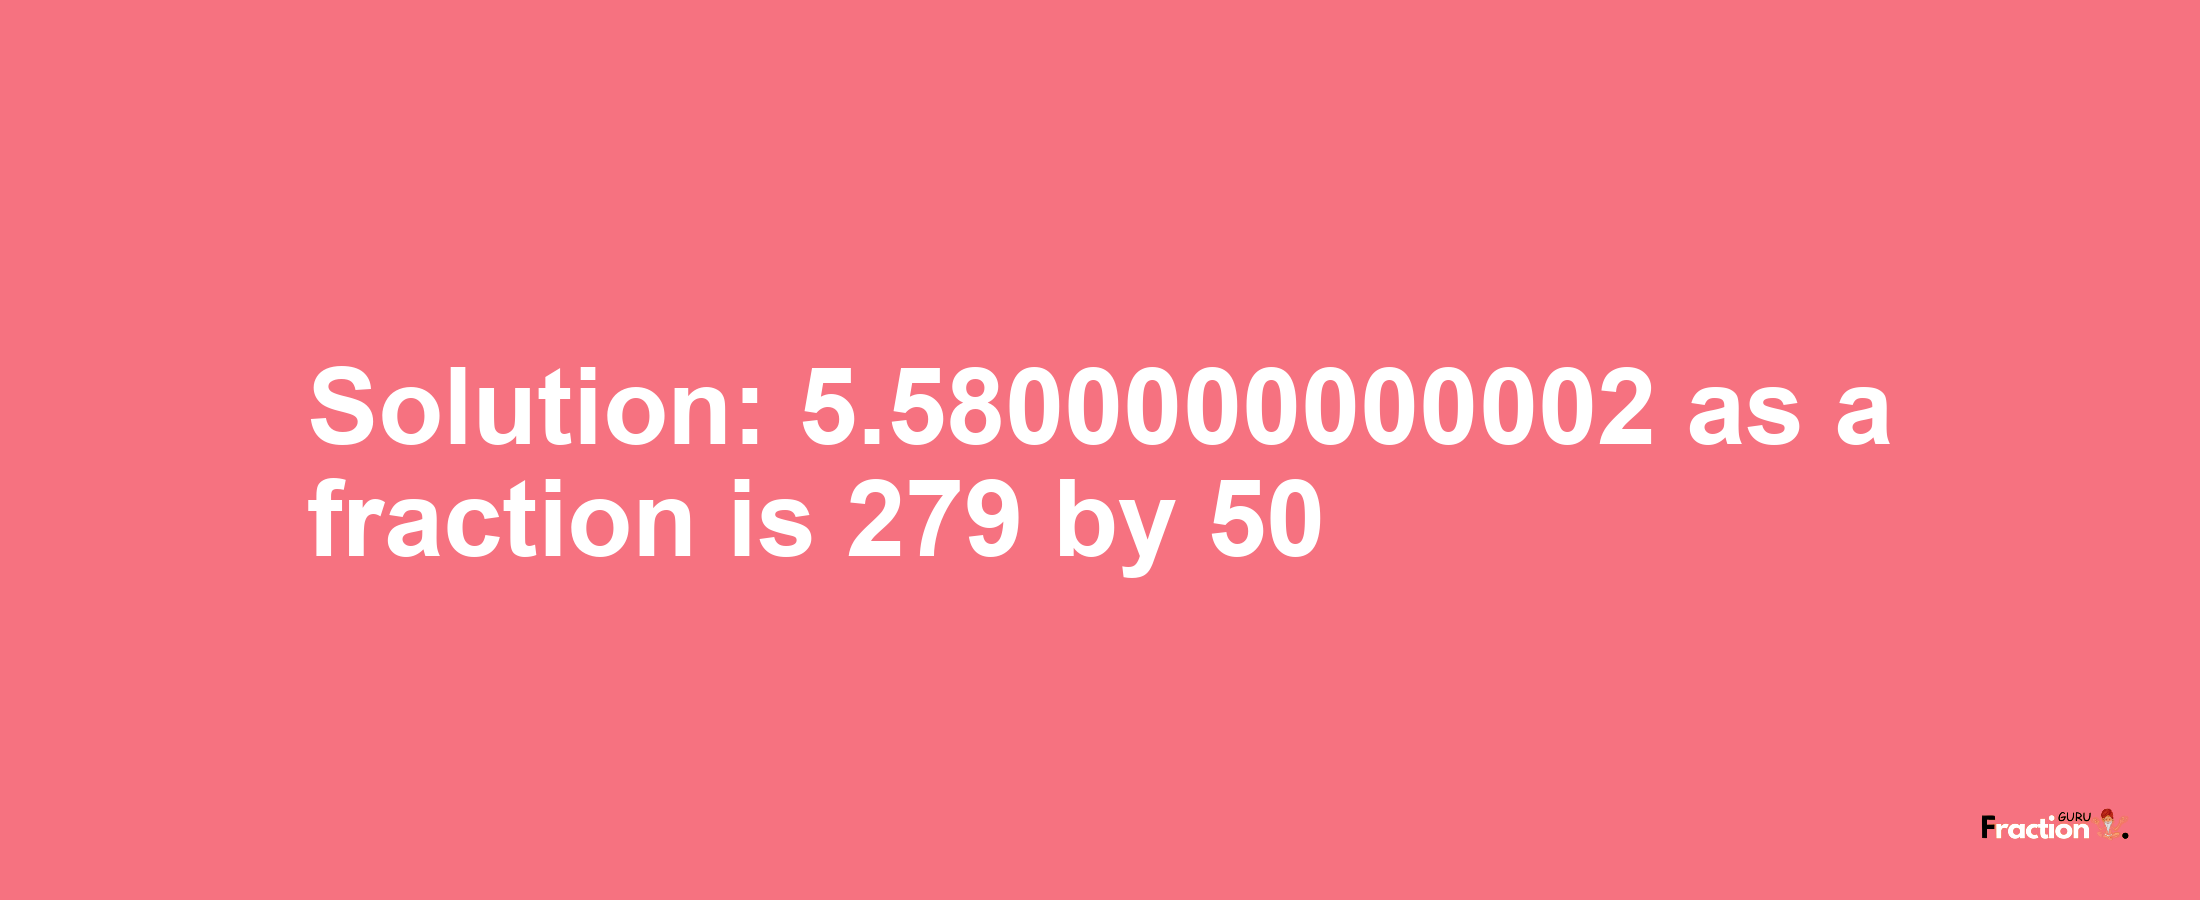 Solution:5.5800000000002 as a fraction is 279/50